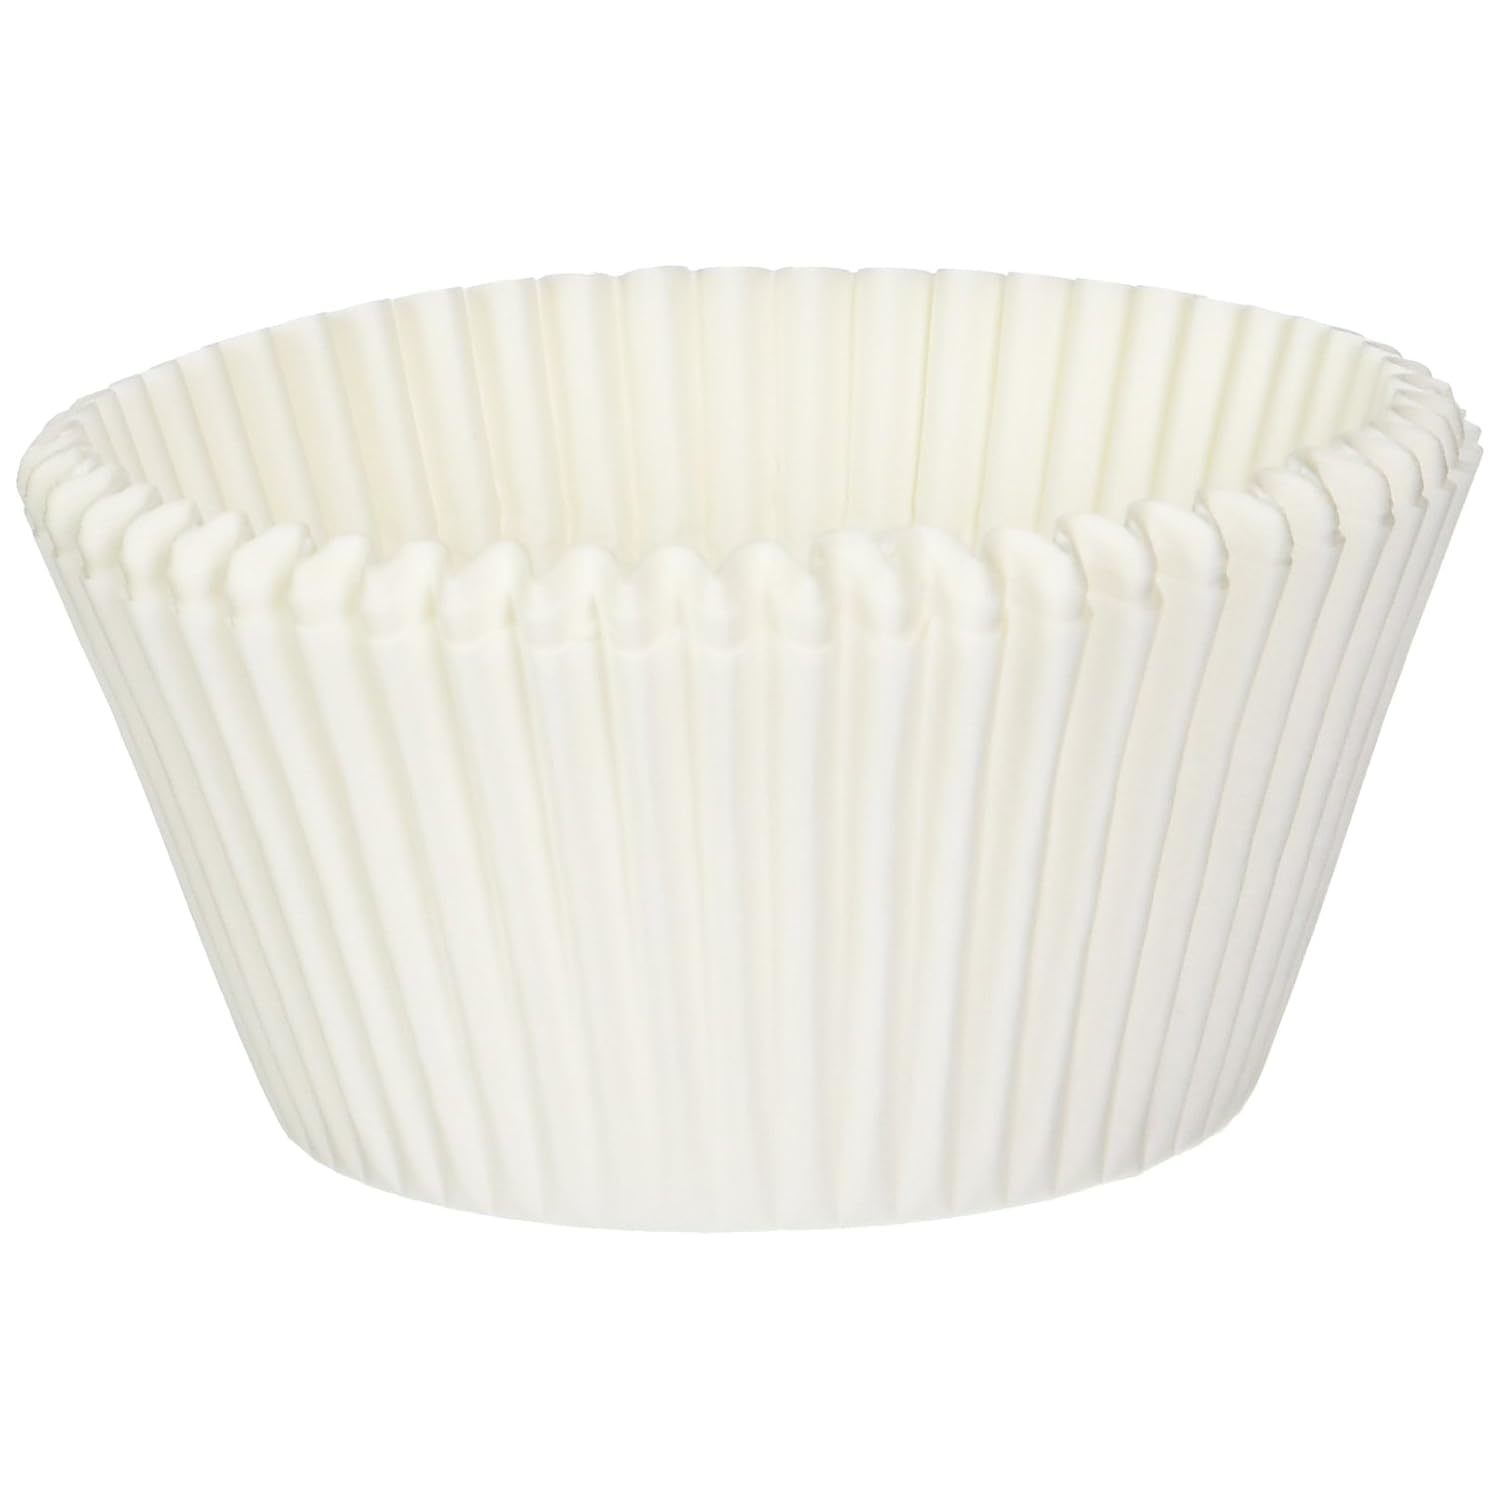 Norpro Giant Muffin Cups, White, Pack of 500, 2.75 x 2 inches (3600B) - $35.99